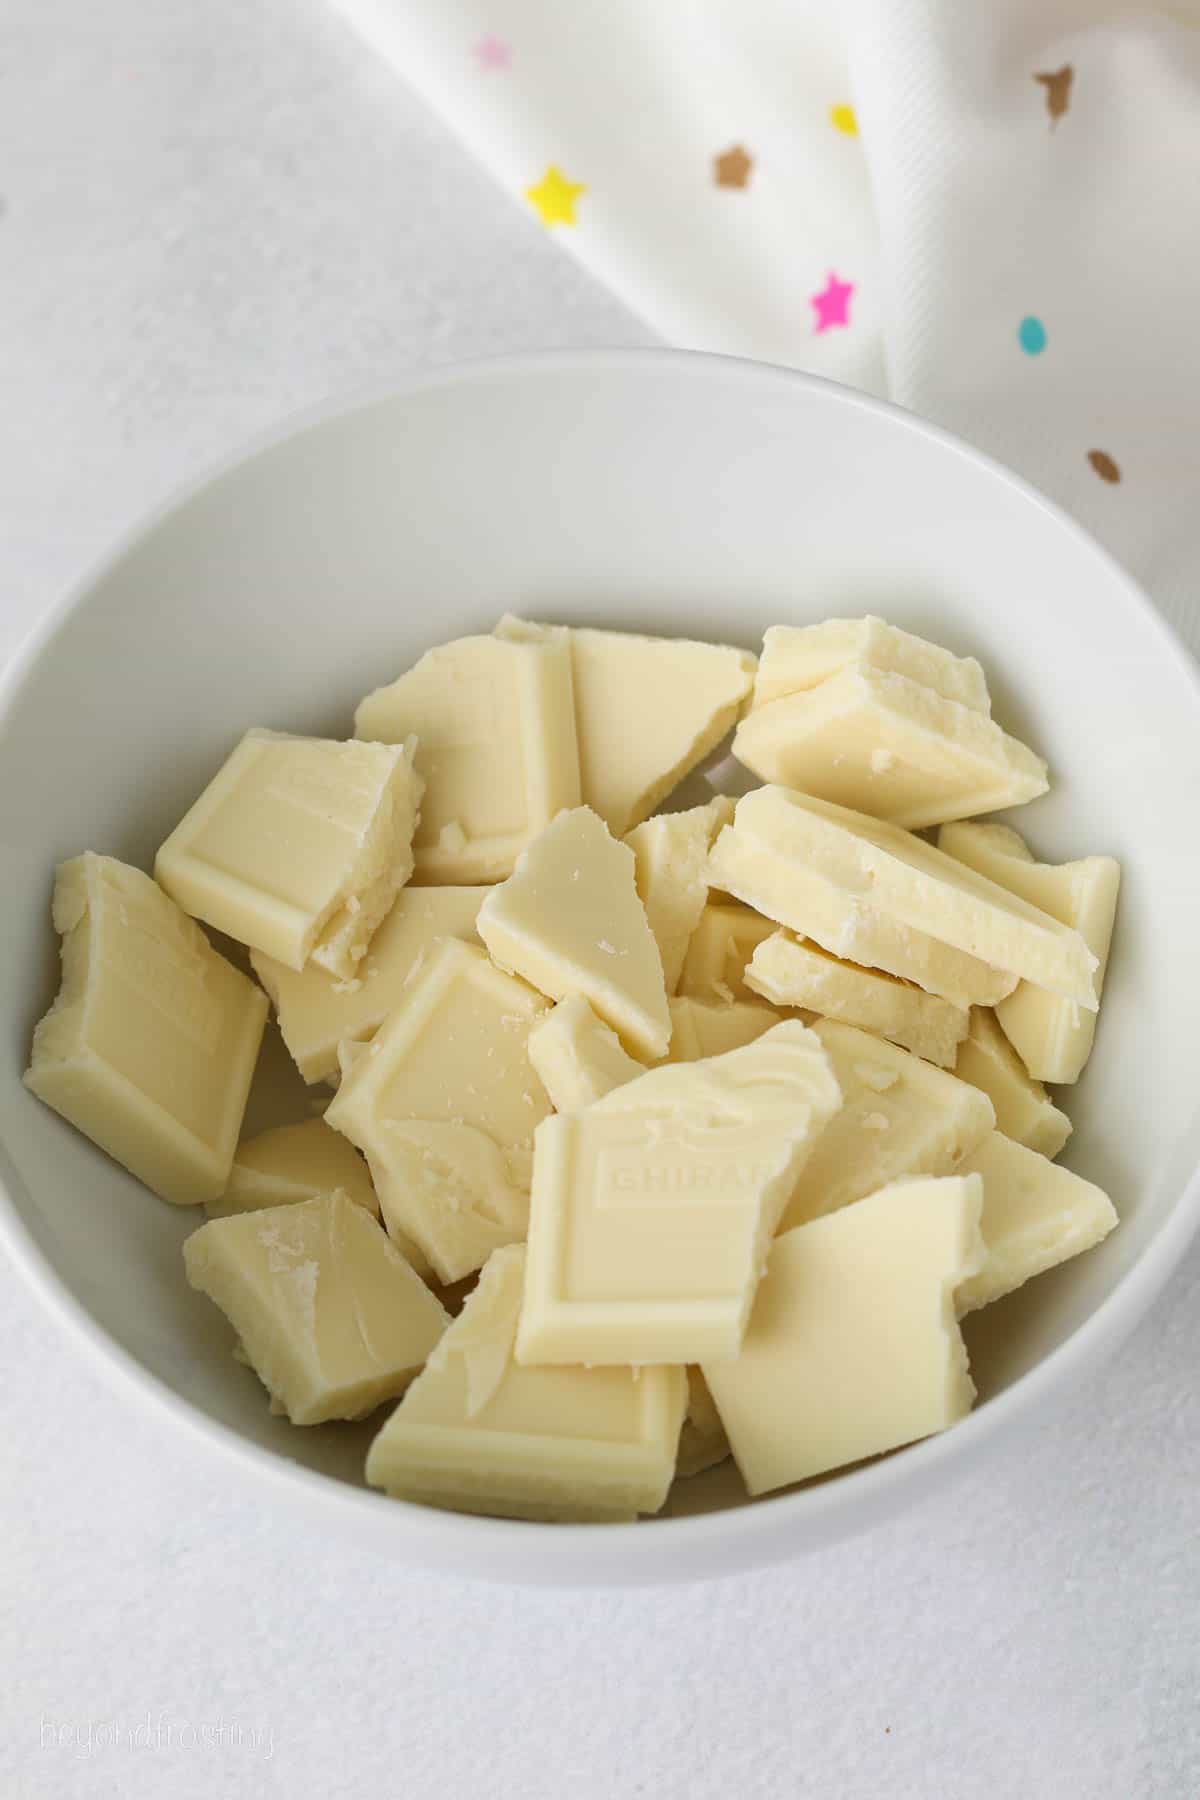 Chopped white chocolate in a white bowl.